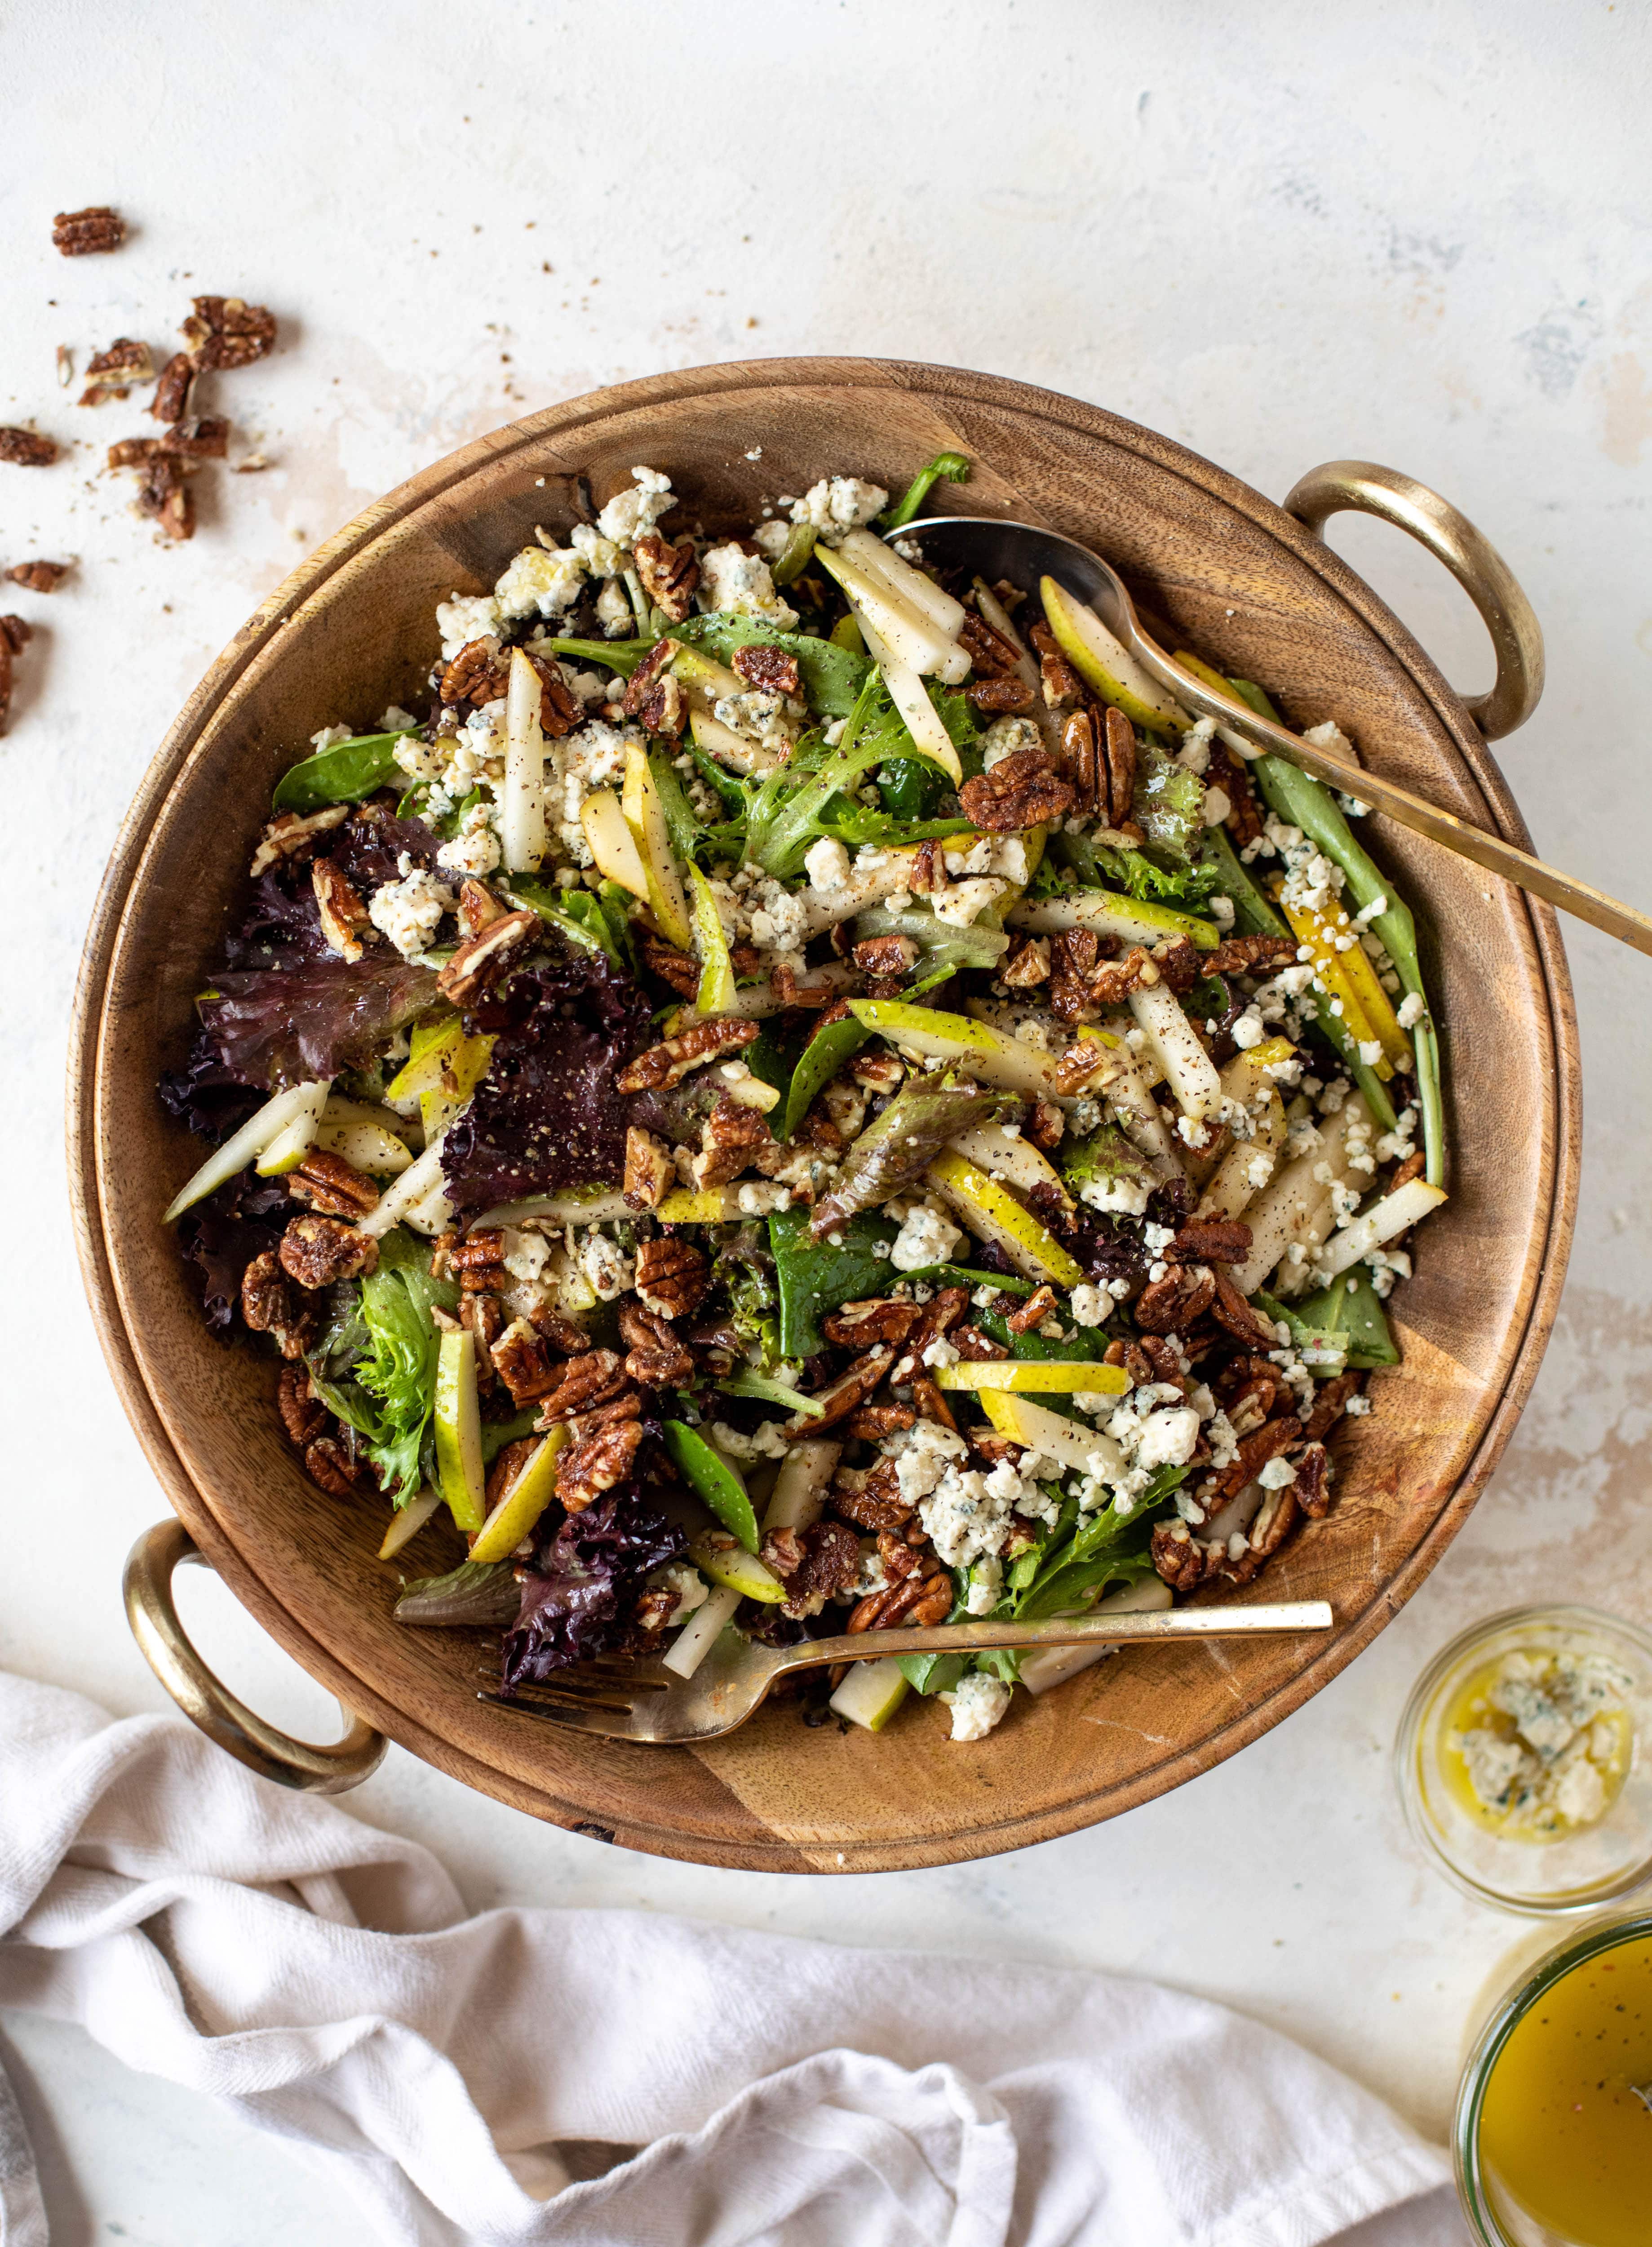 This pear gorgonzola is the perfect simple greens salad for the holiday and winter season! Topped with sweet and spicy pecans and champagne vinaigrette!